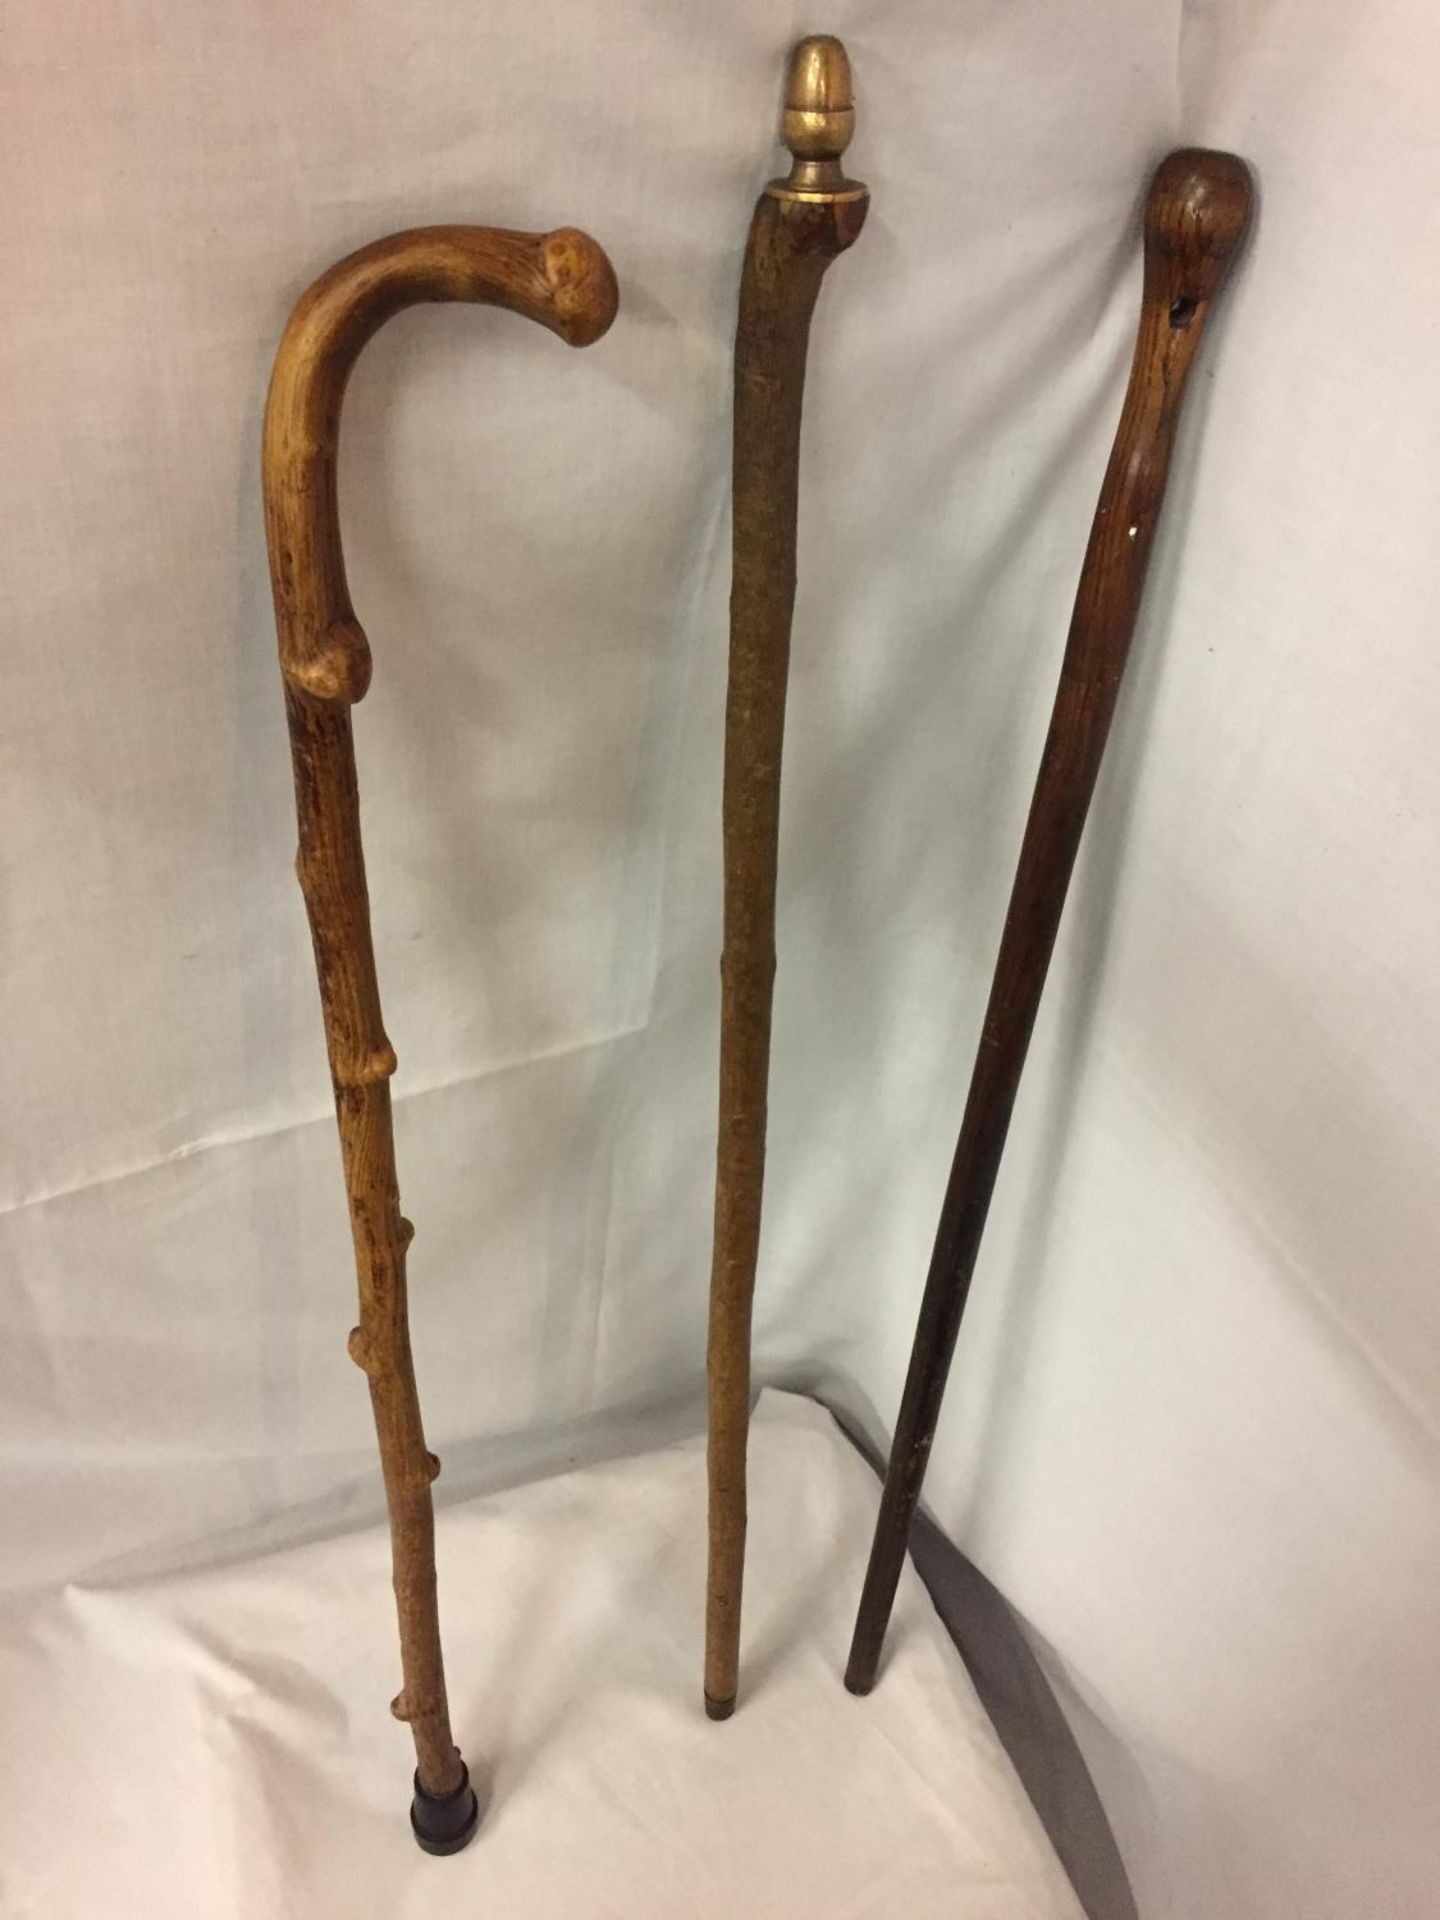 THREE WOODEN WALKING STICKS, ONE WITH DECORATIVE BRASS ACORN TOP - Image 2 of 4